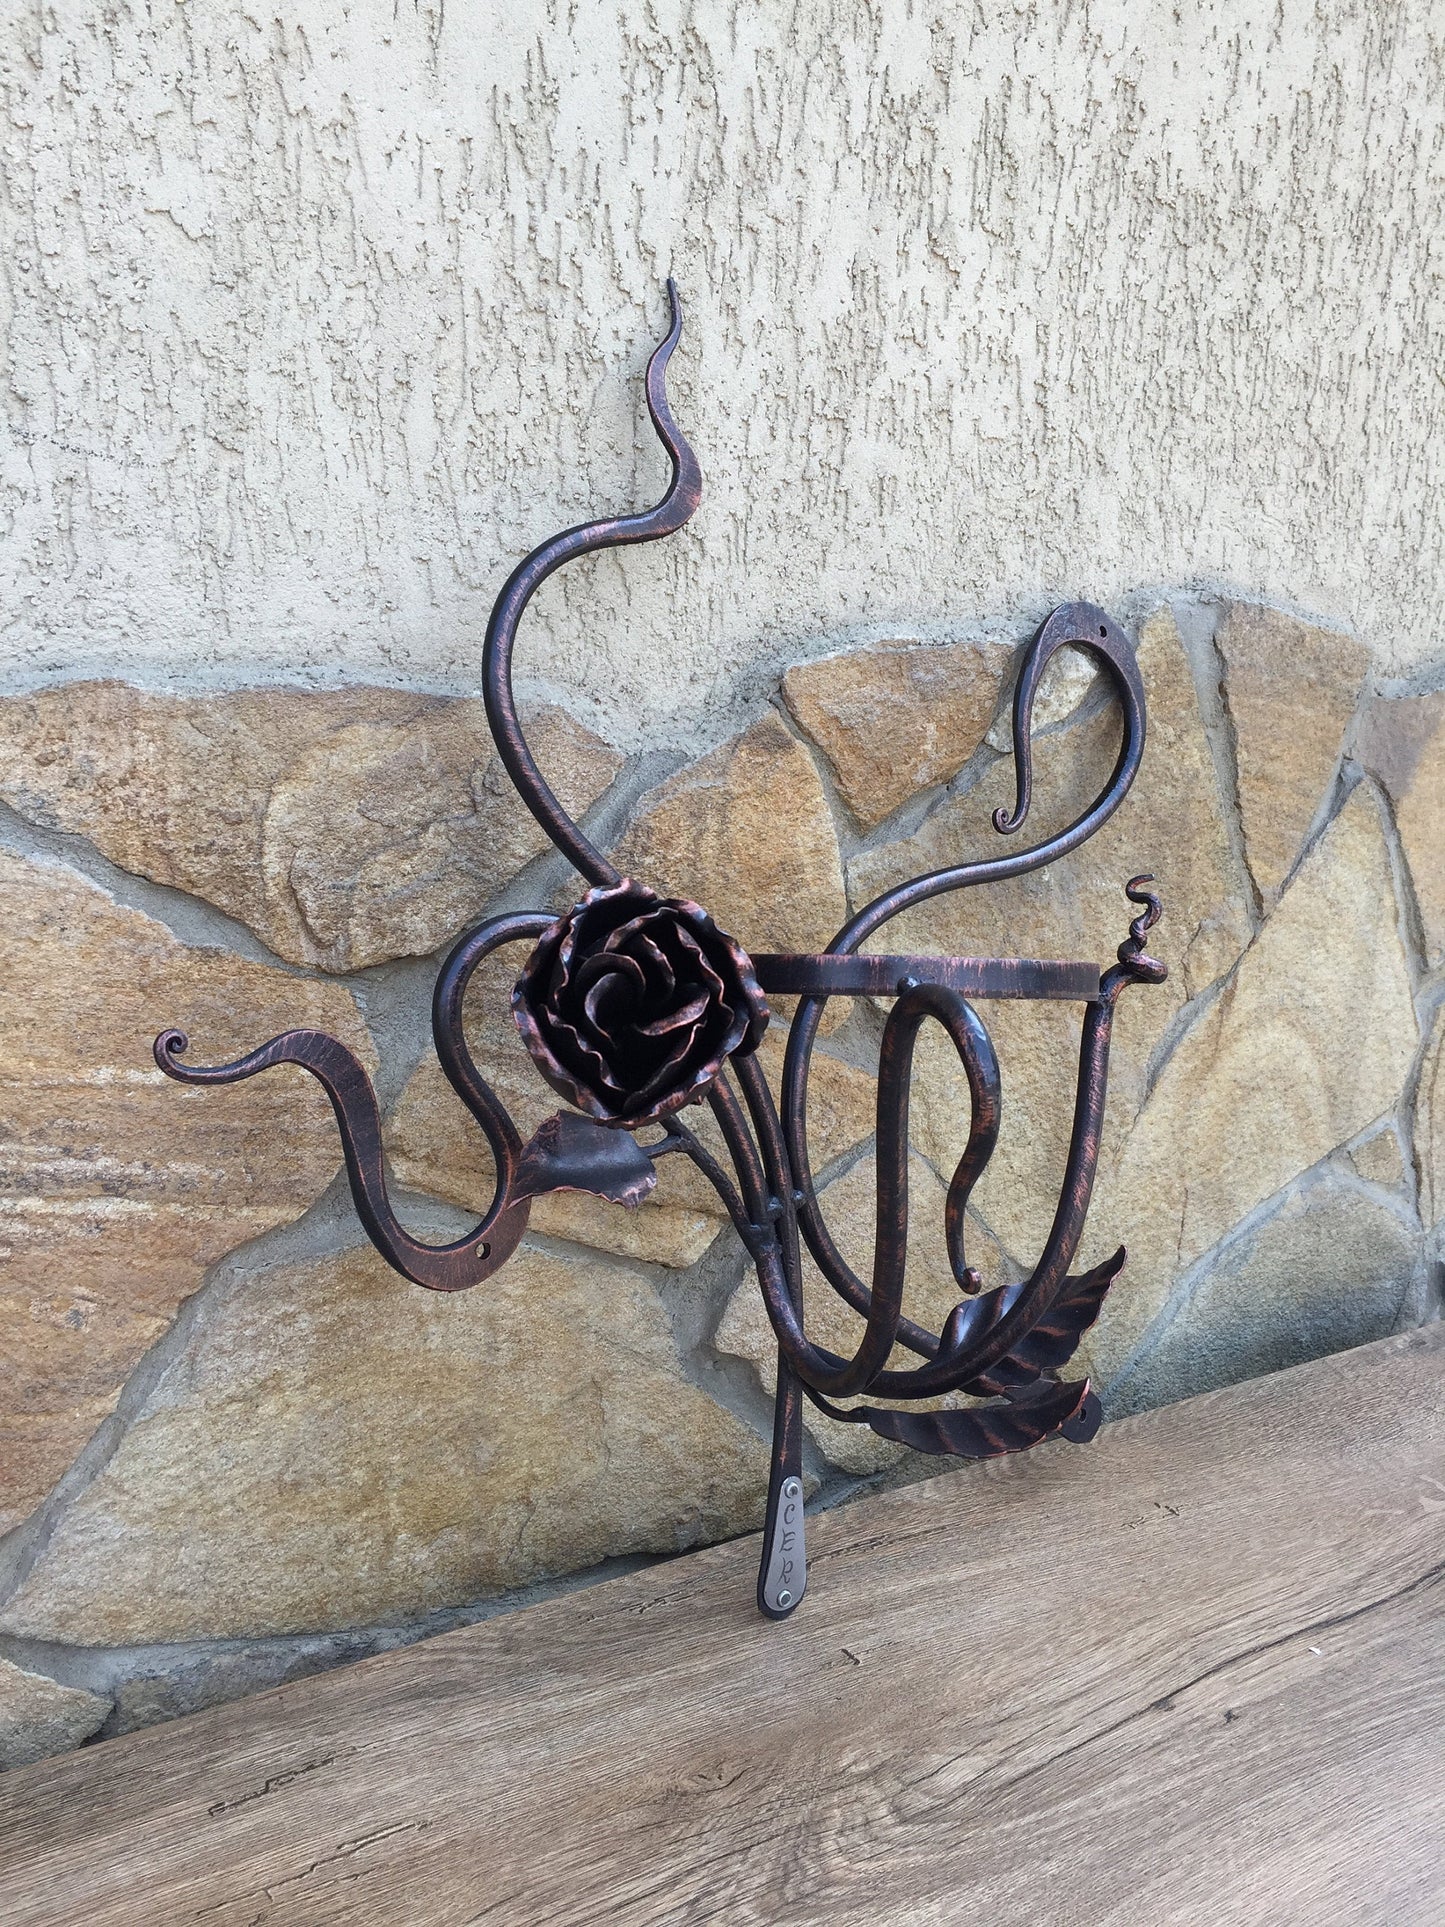 Wall planter, iron plant stand, flower pot holder, stand pot holder, indoor planters, metal hanger stand, metal plant pot,garden hanger iron